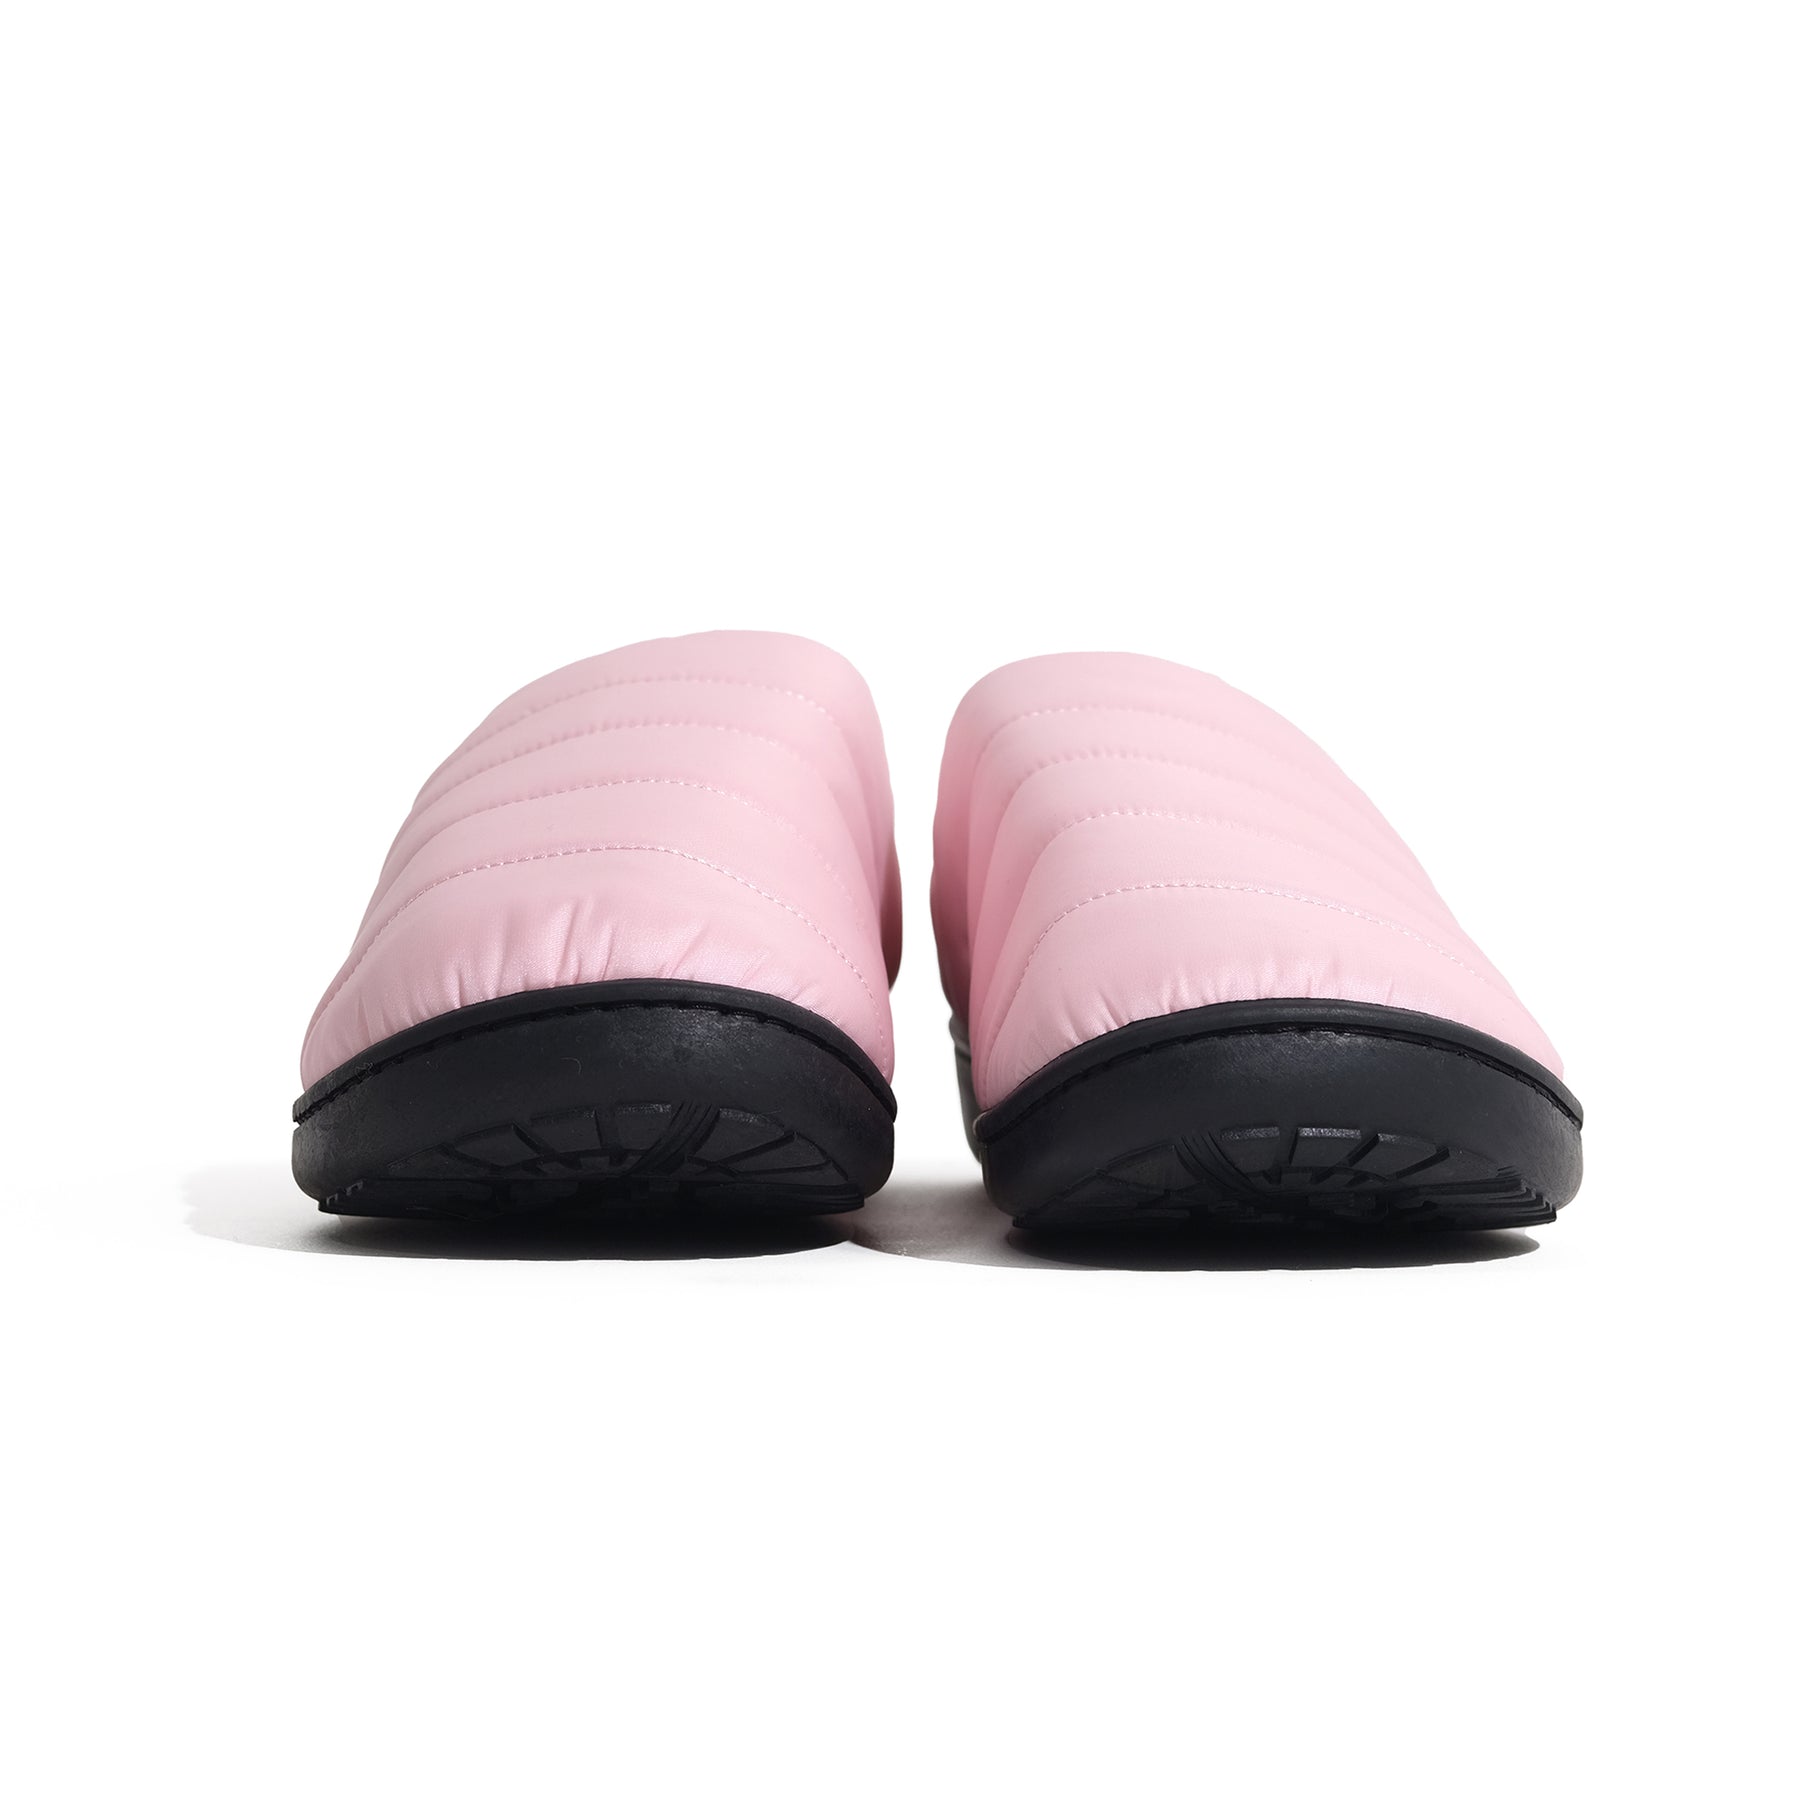 SUBU Fall AMEICO Pink Official US Winter of & Distributor - - - Slippers